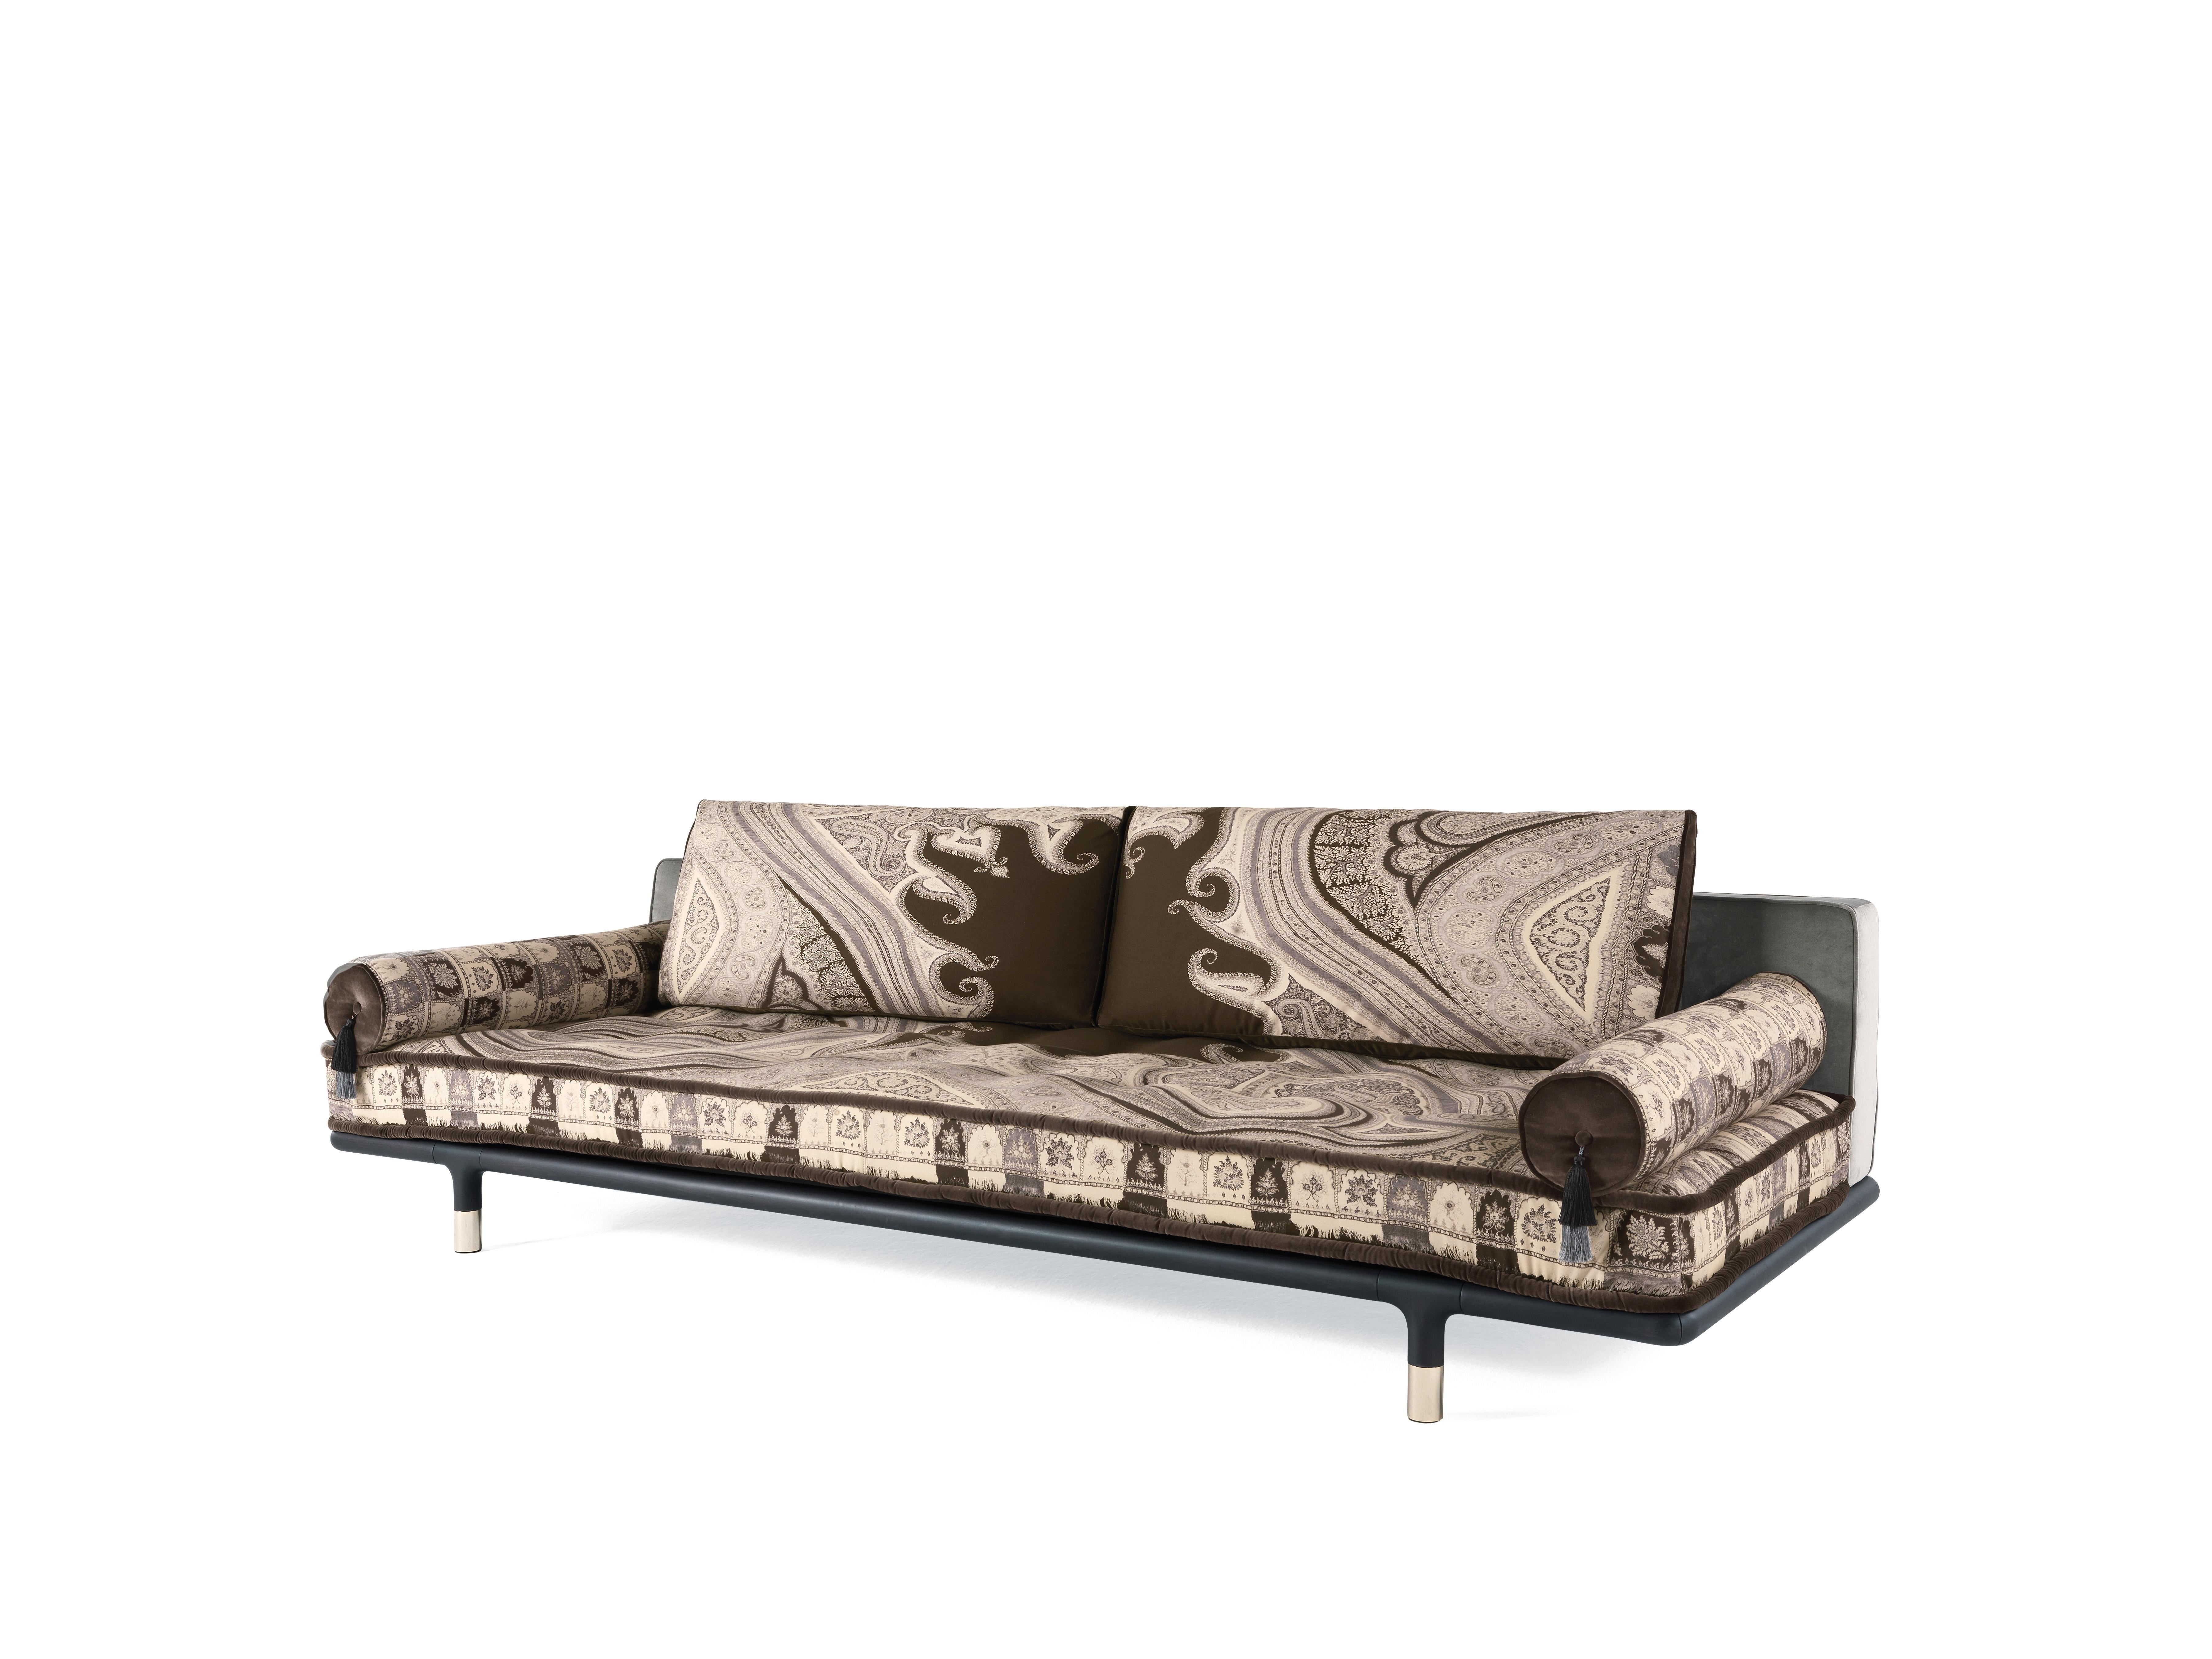 In the Woodstock sofa, the ethnic-inspired mattress conformation recalls Ottoman and North African traditions.
Dressed in the iconic fabric with “Mountain” print in a new color variant, with a beige base and dark motifs reminiscent of gypsy designs,